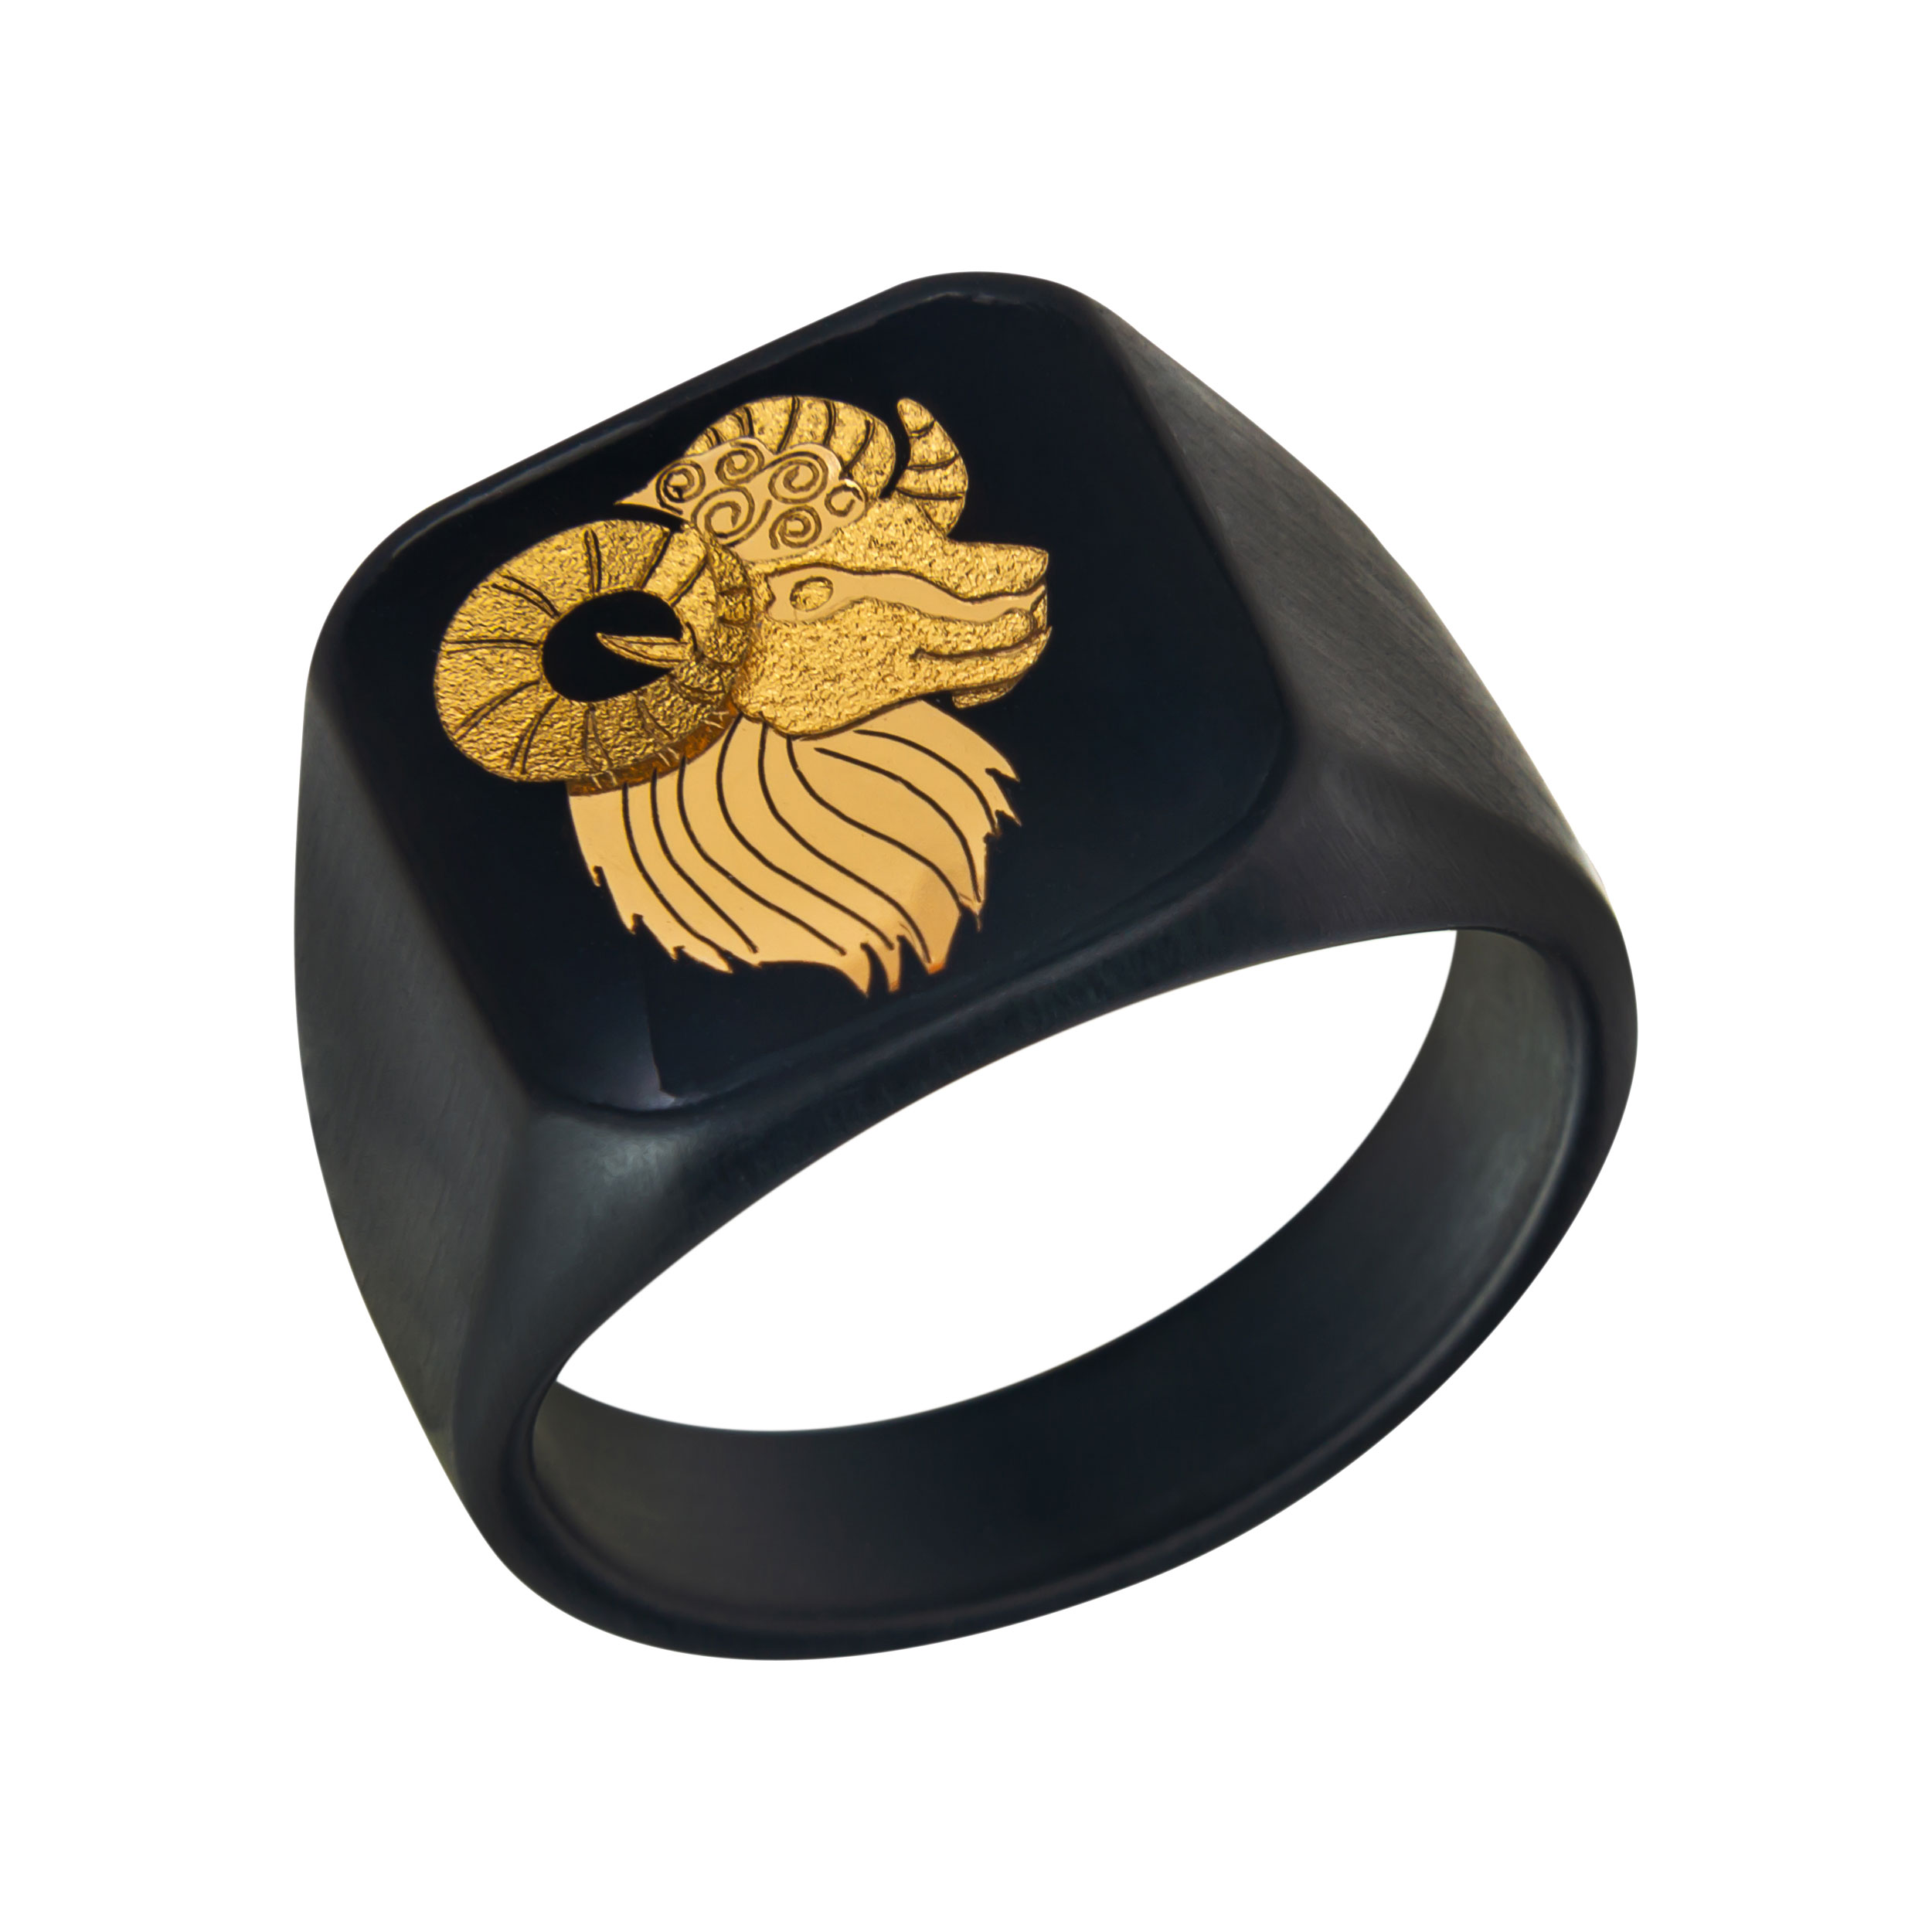 Men's tungsten stone ring and 24 carat gold leaf with the symbol design of April